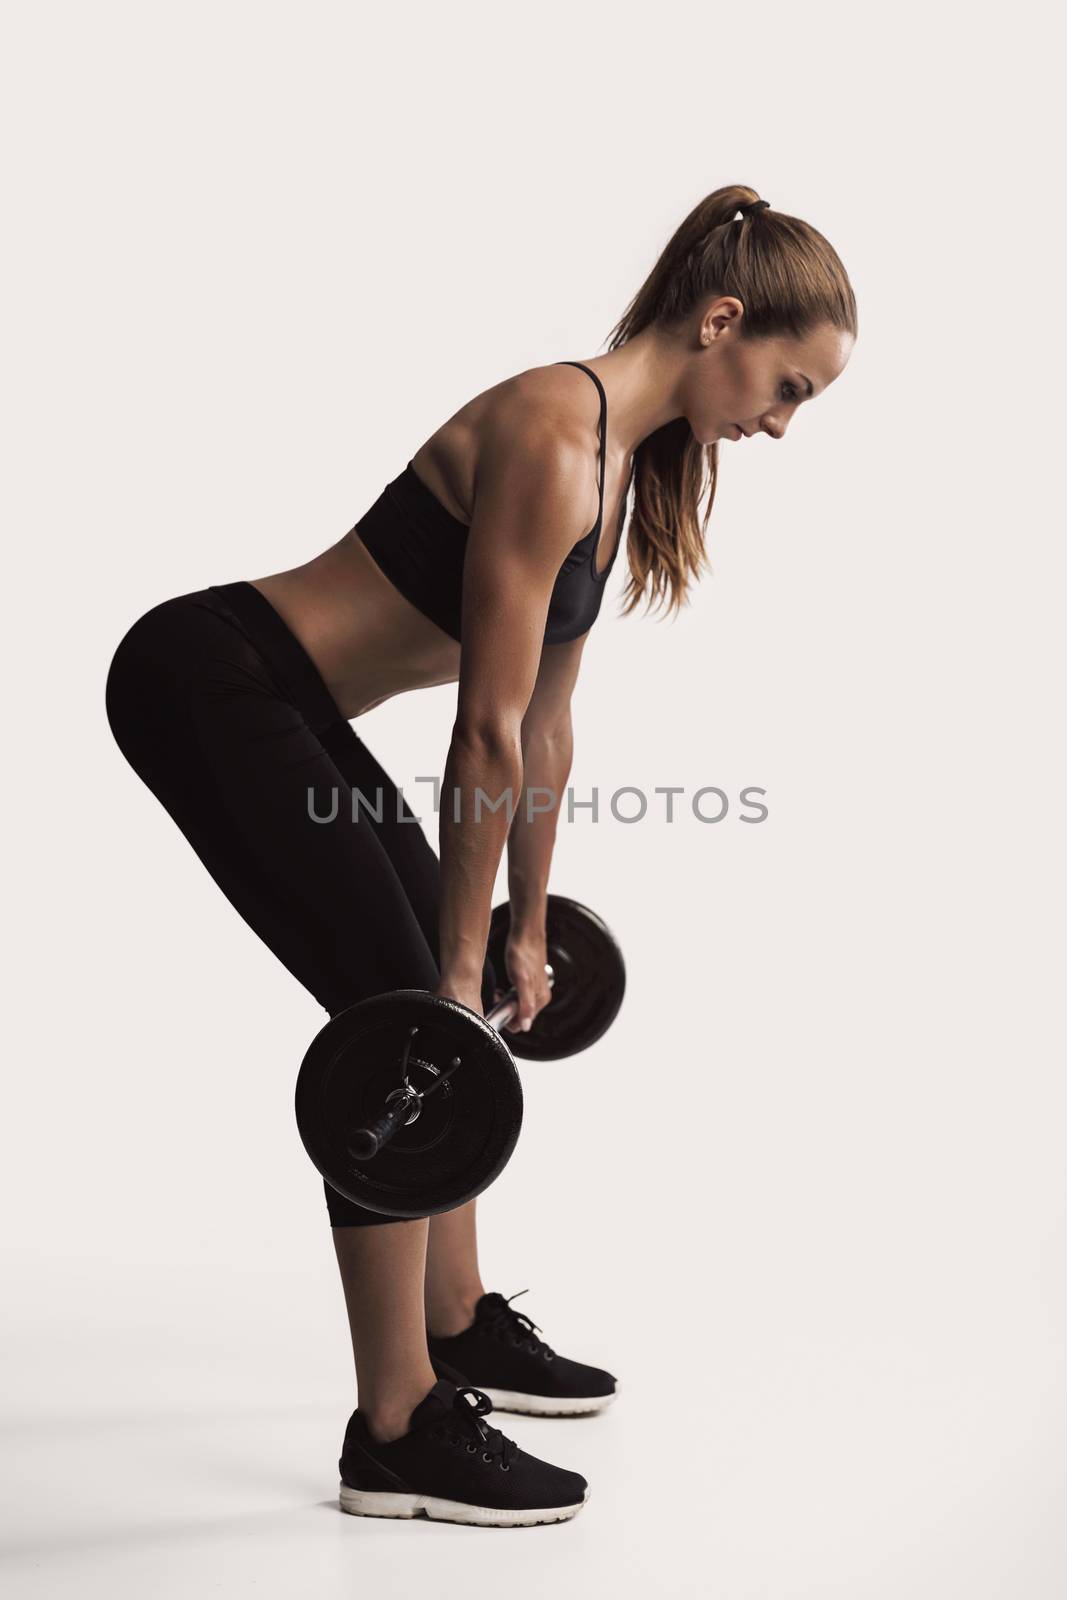 Weights lifting by Iko